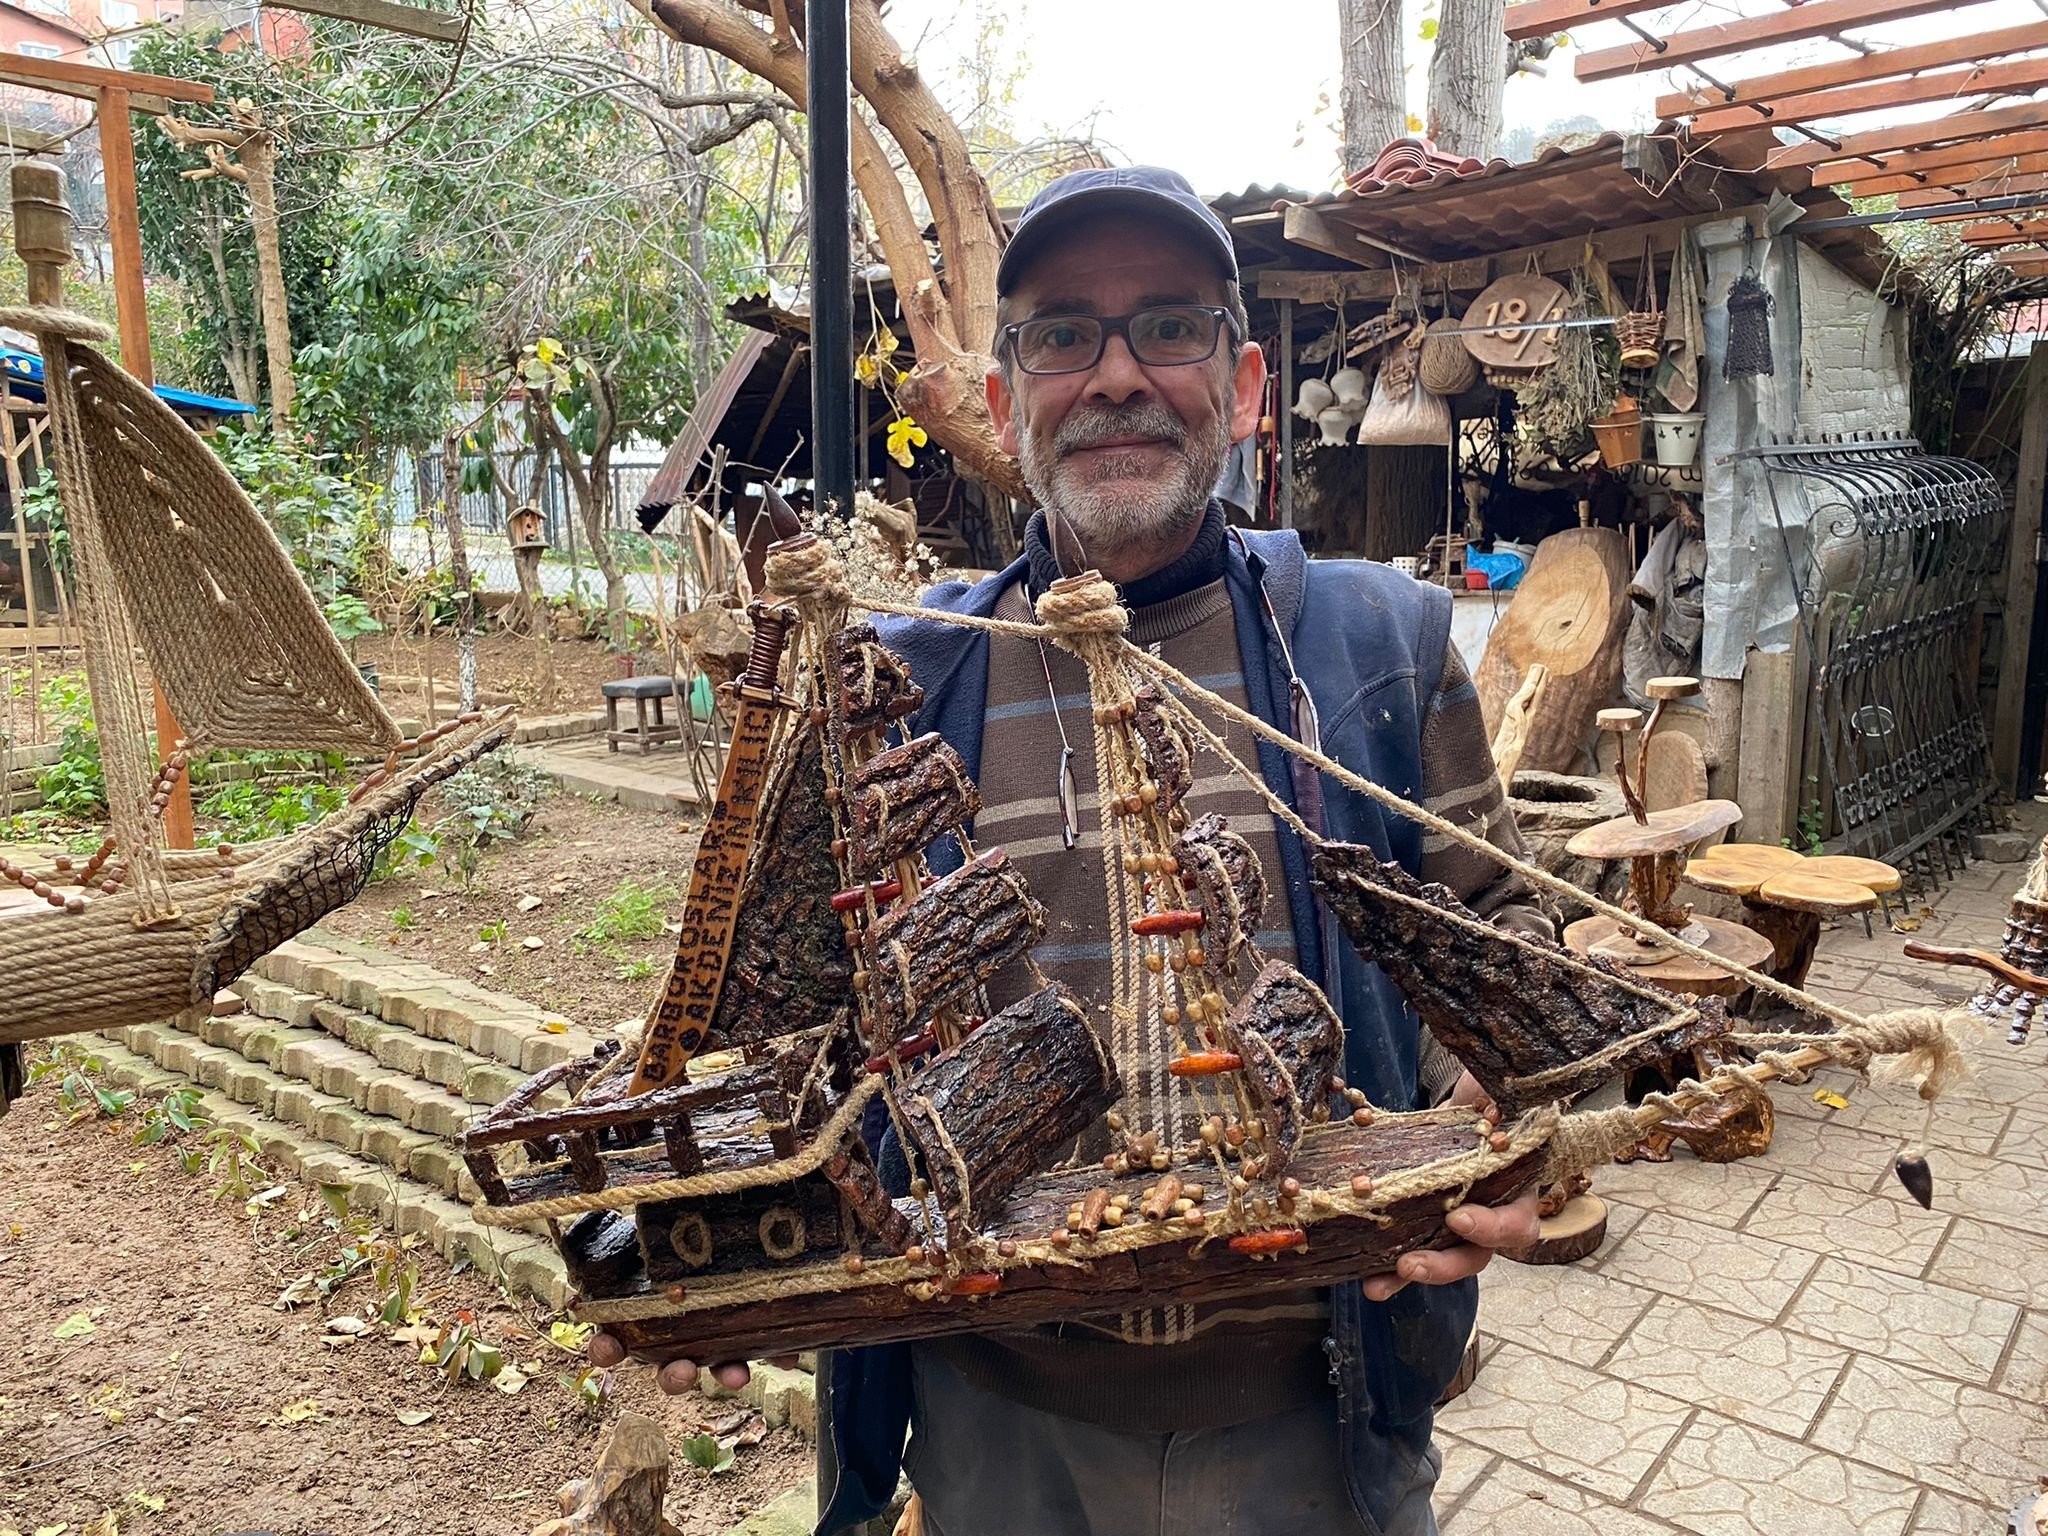 Mustafa Avcı holds one of his artworks made from rotten trees, Istanbul, Turkey, Dec. 12, 2021. (IHA Photo)